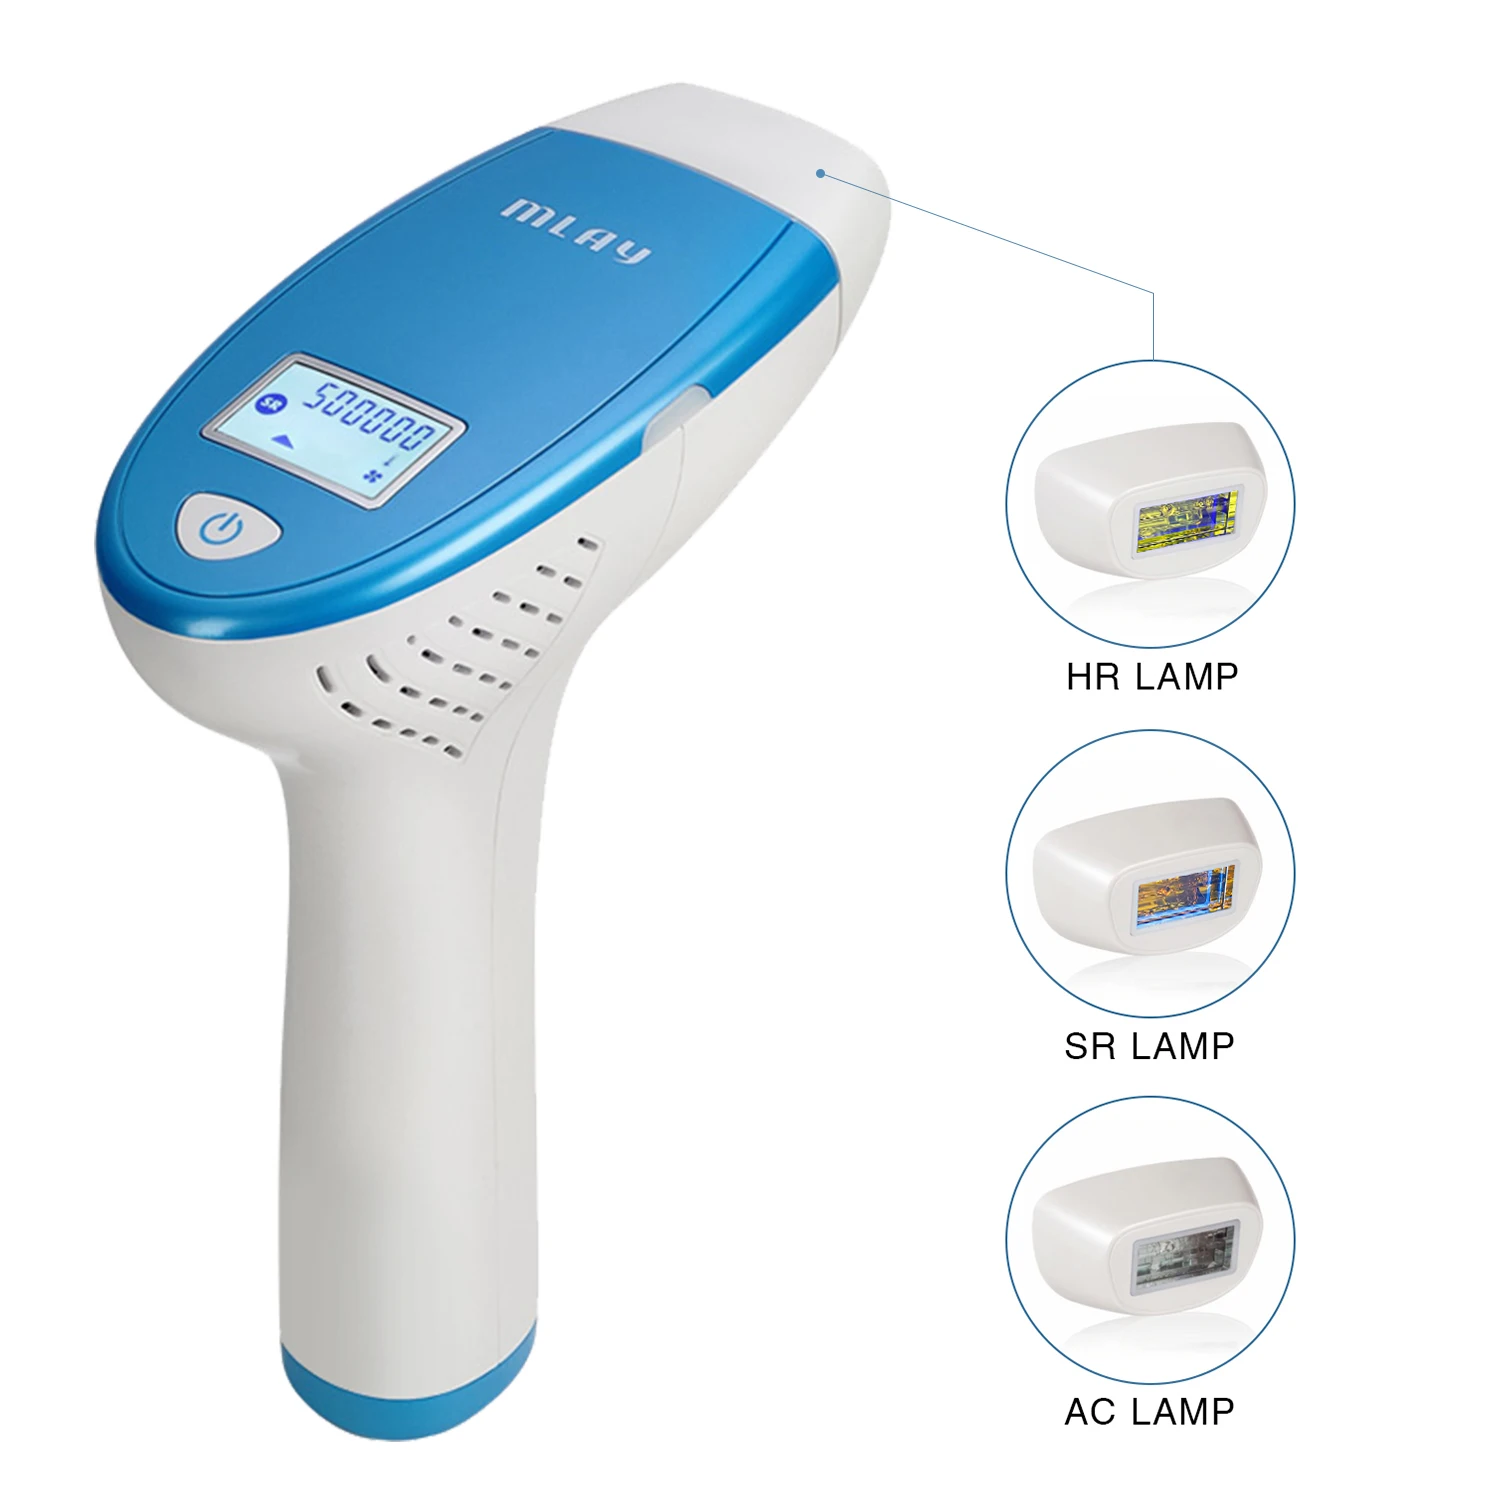 Factory M3 MLAY home use IPL hair removal device IPL Machine Laser IPL with 500000 Shots Free Shipping